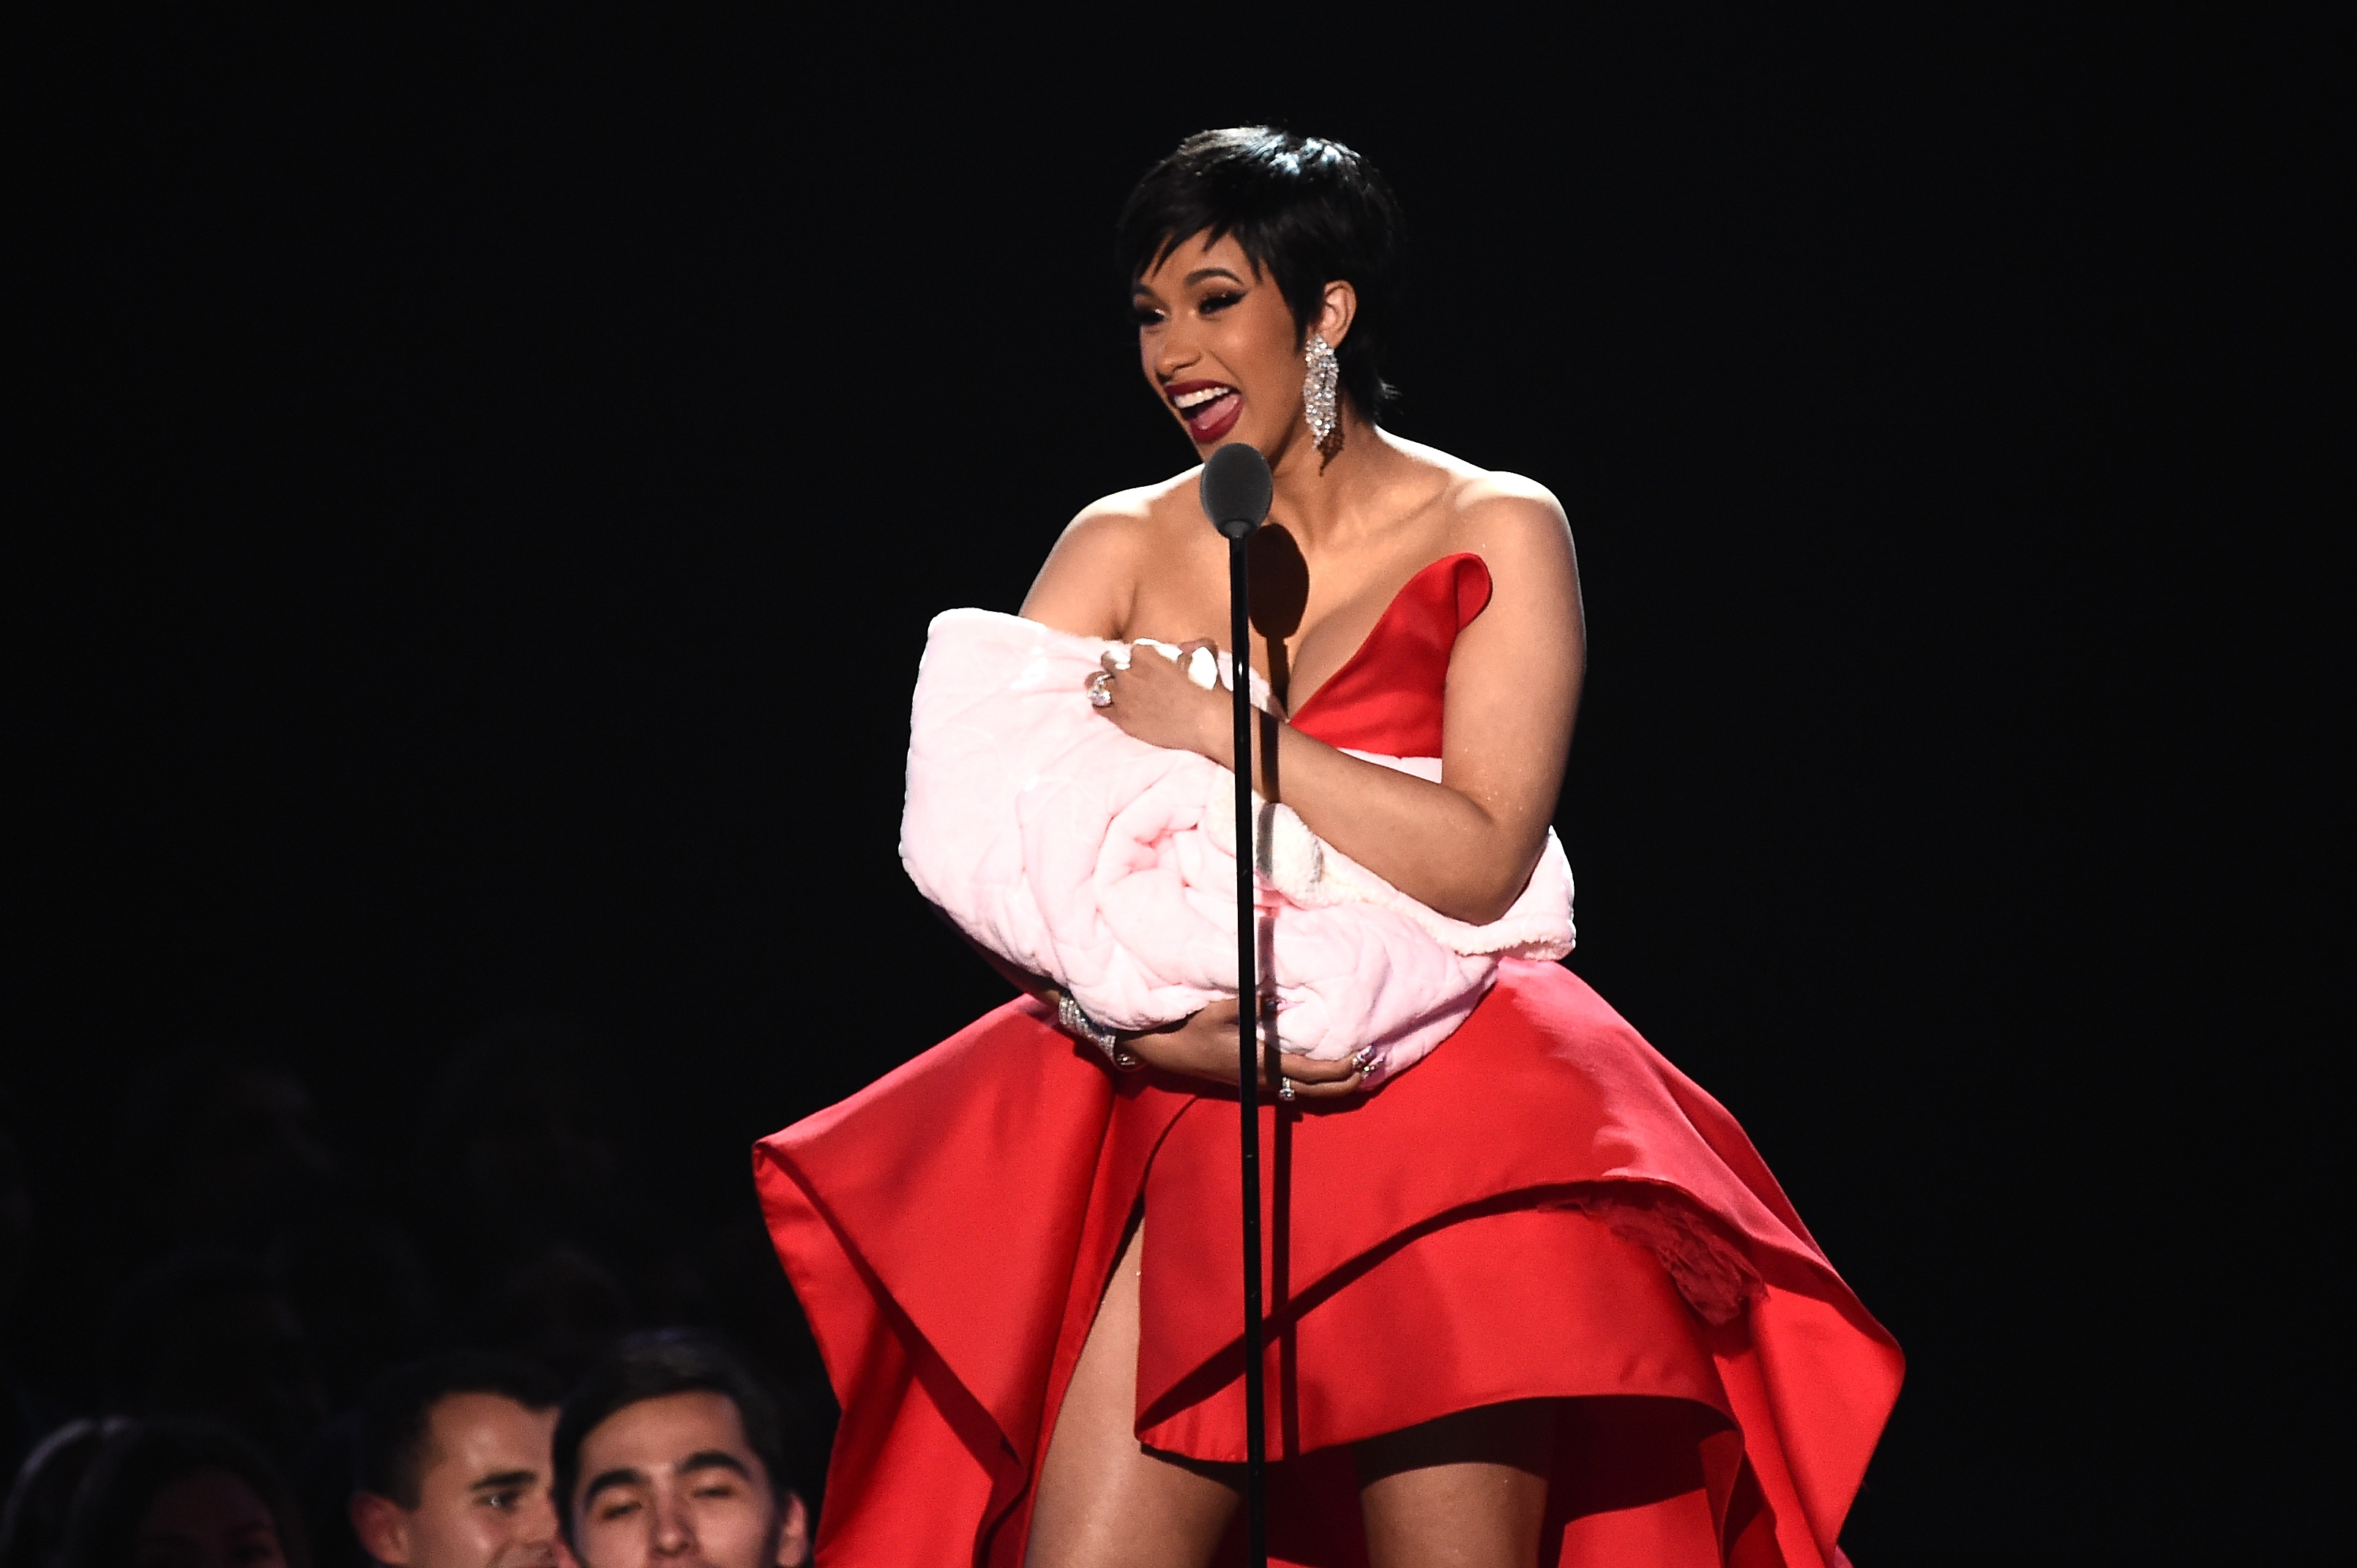 Cardi B opens up about getting her breasts redone